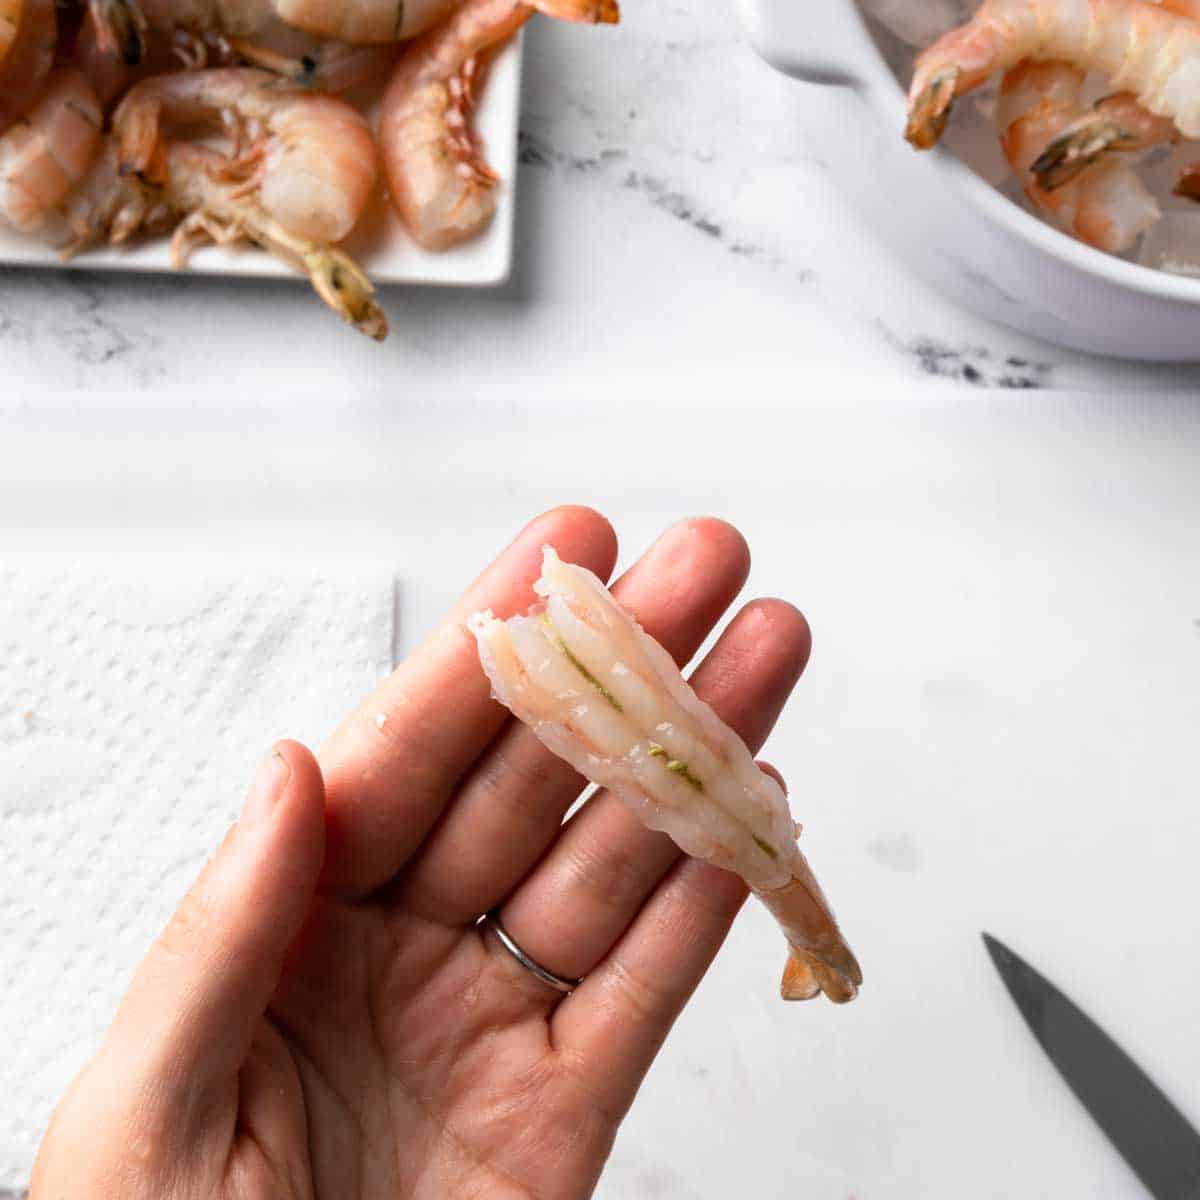 A hand holding a fresh shrimp that has been split to reveal the vein.